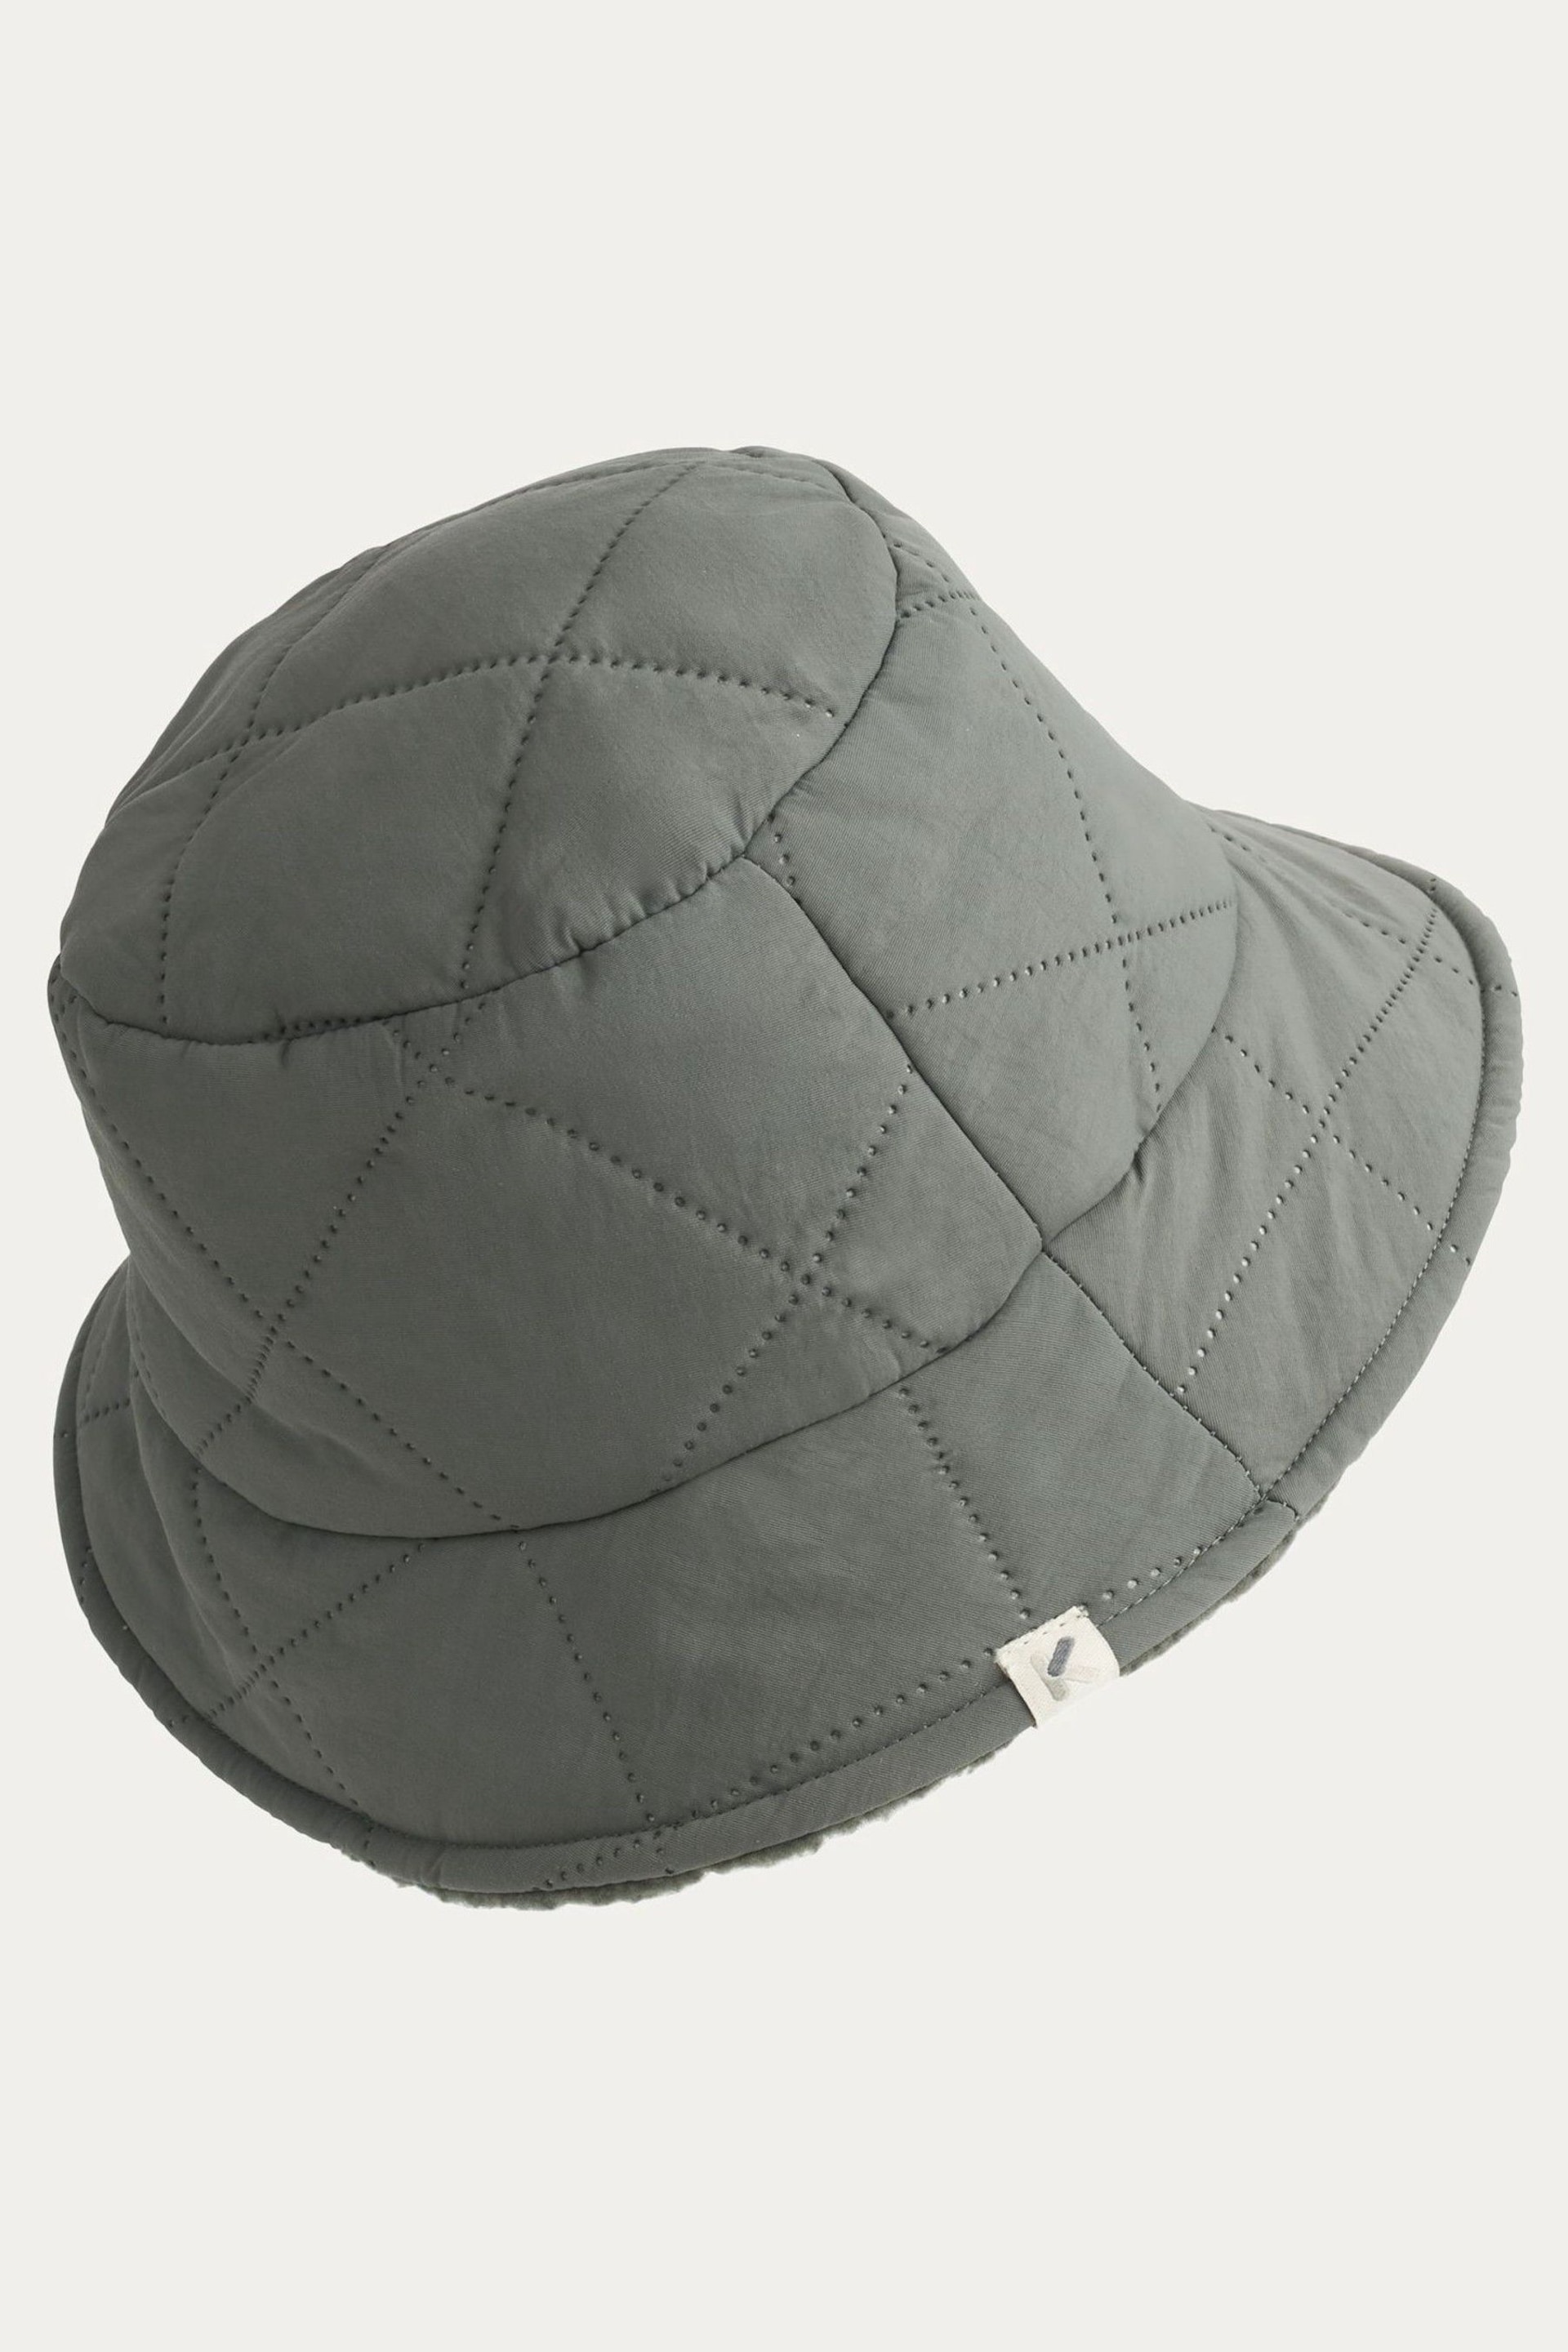 KIDLY Quilted Bucket Hat - Image 3 of 5